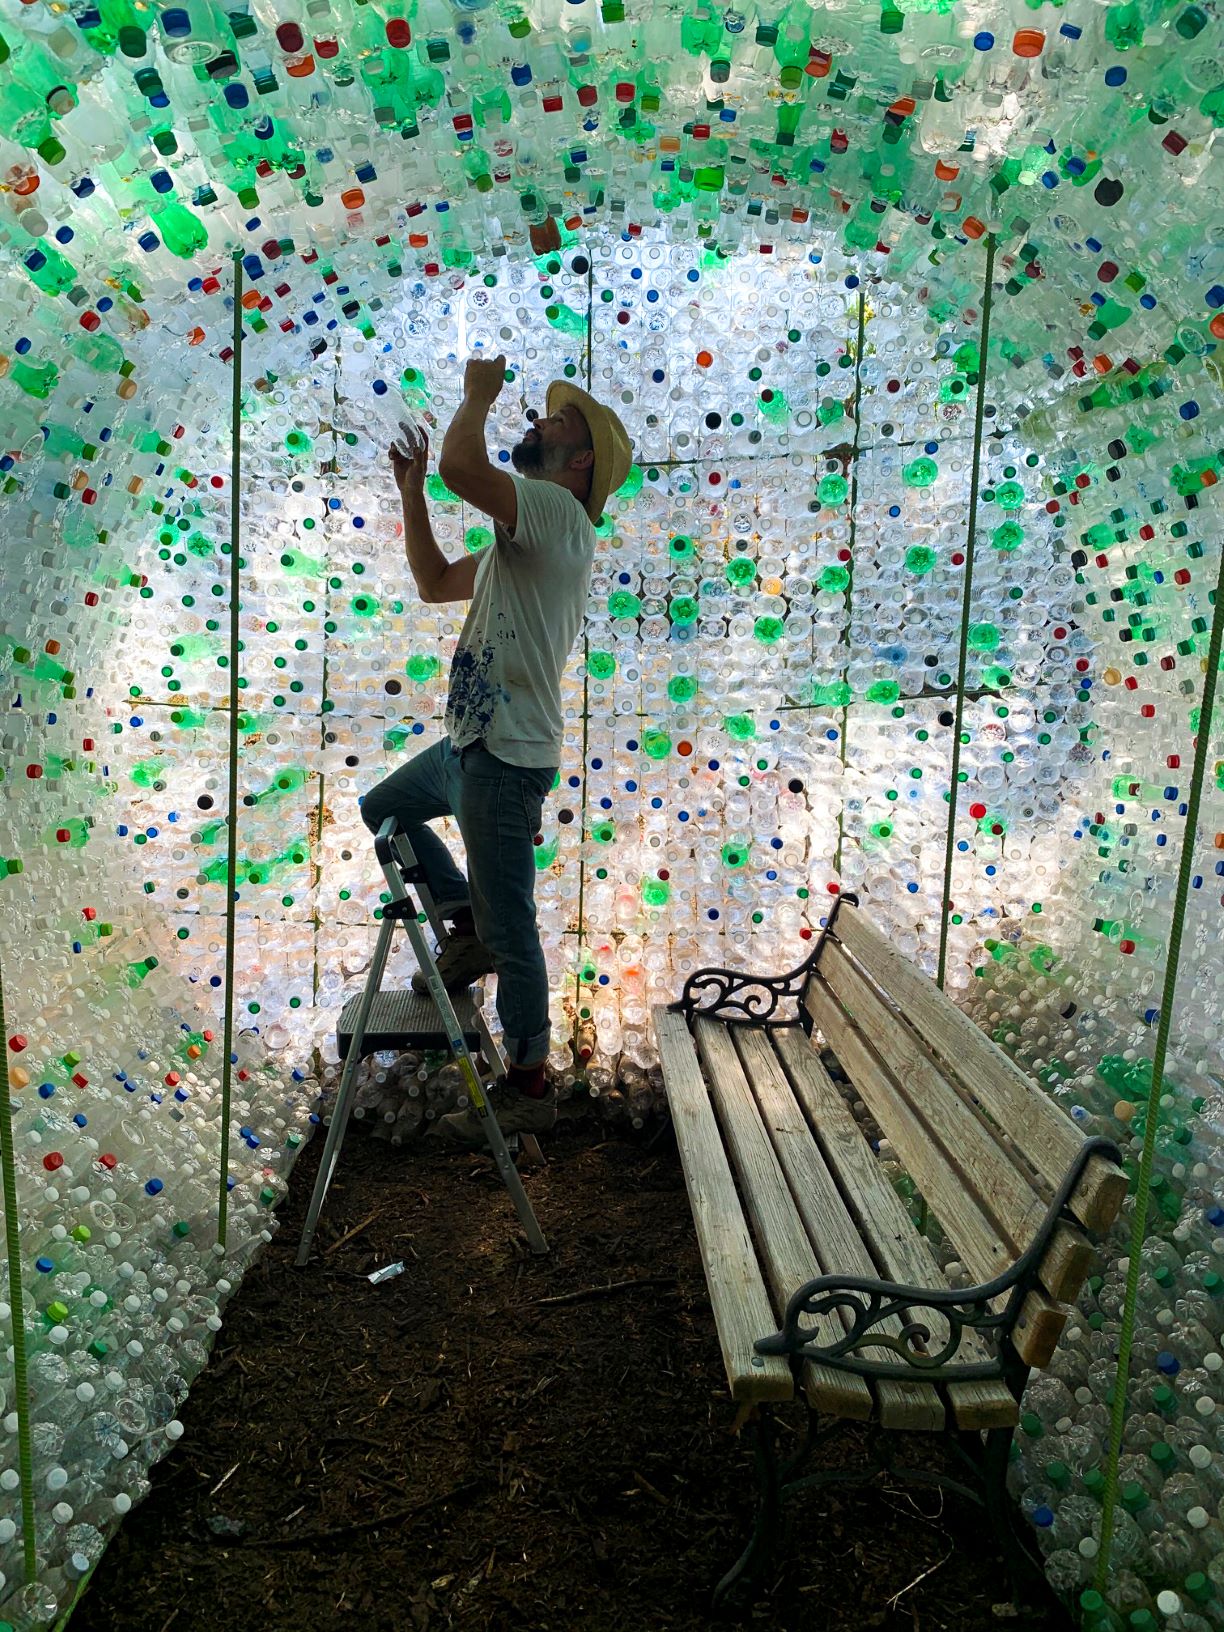 The City of West Columbia worked with artist Karl Larsen to create an installation illustrating the magnitude of plastic waste